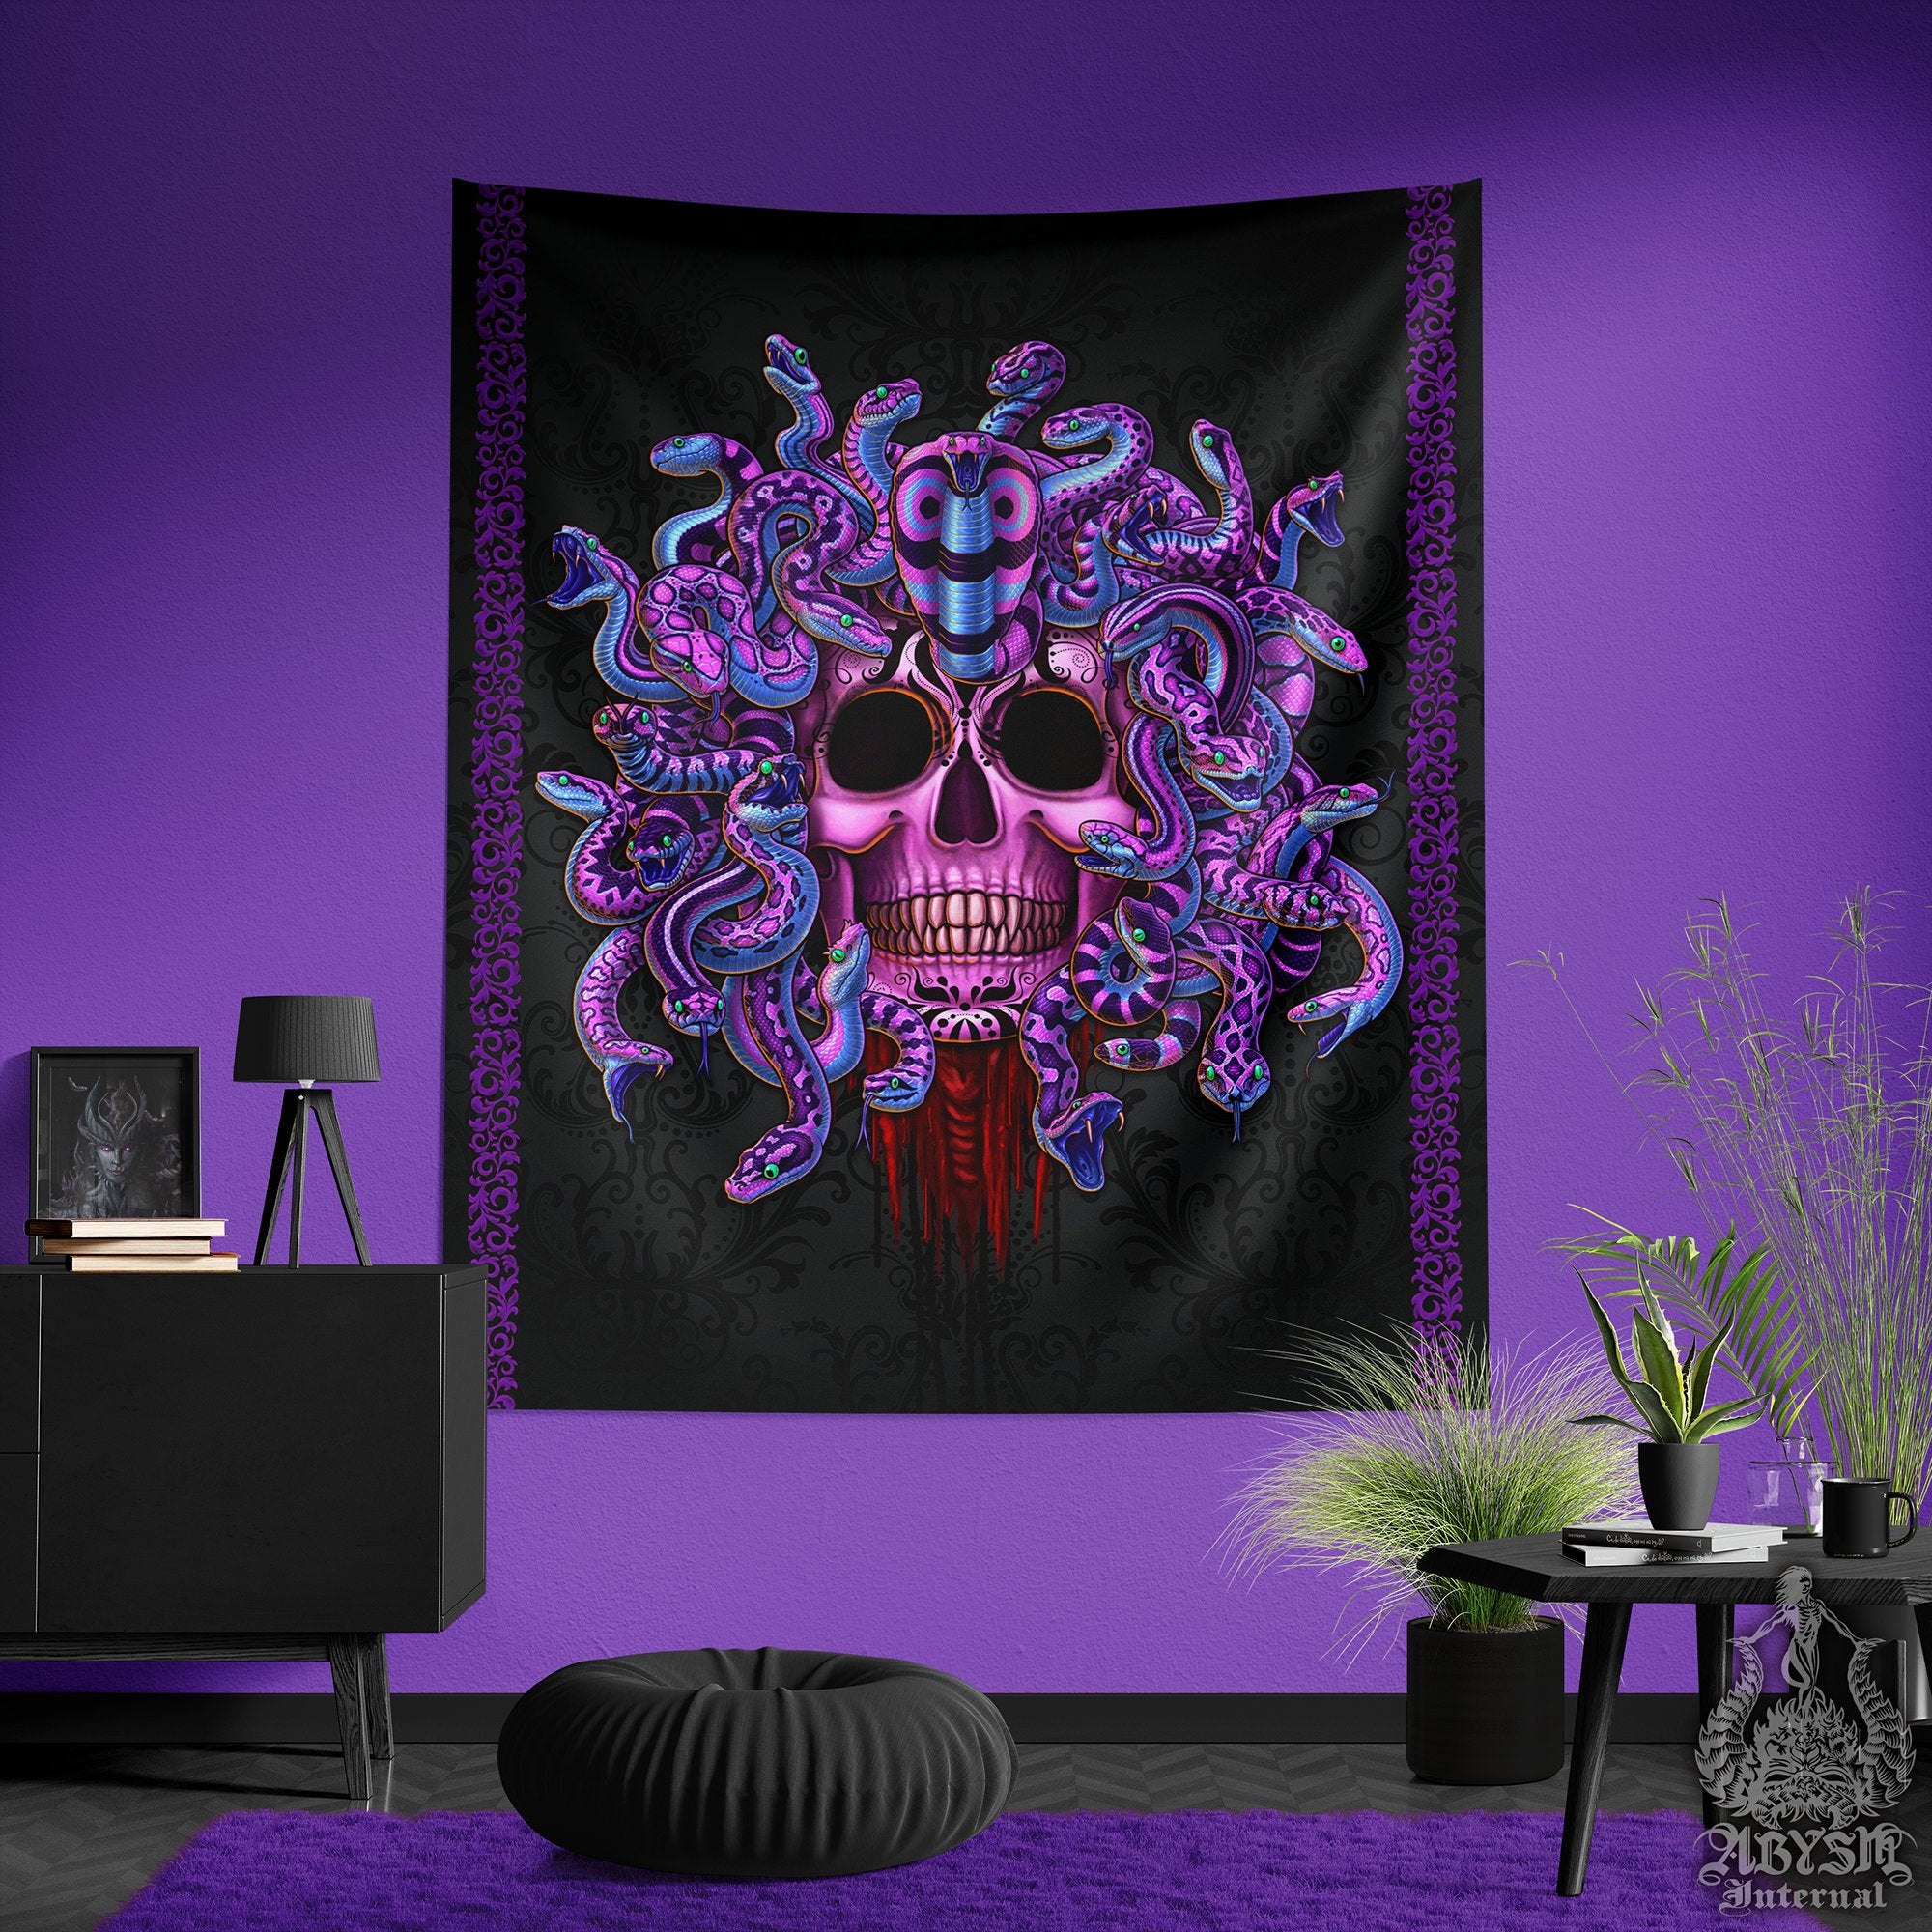 Pastel Goth Tapestry, Medusa Wall Hanging, Gothic Home Decor, Whimsigoth Vertical Art Print - Purple & Black Skull, 2 Faces - Abysm Internal